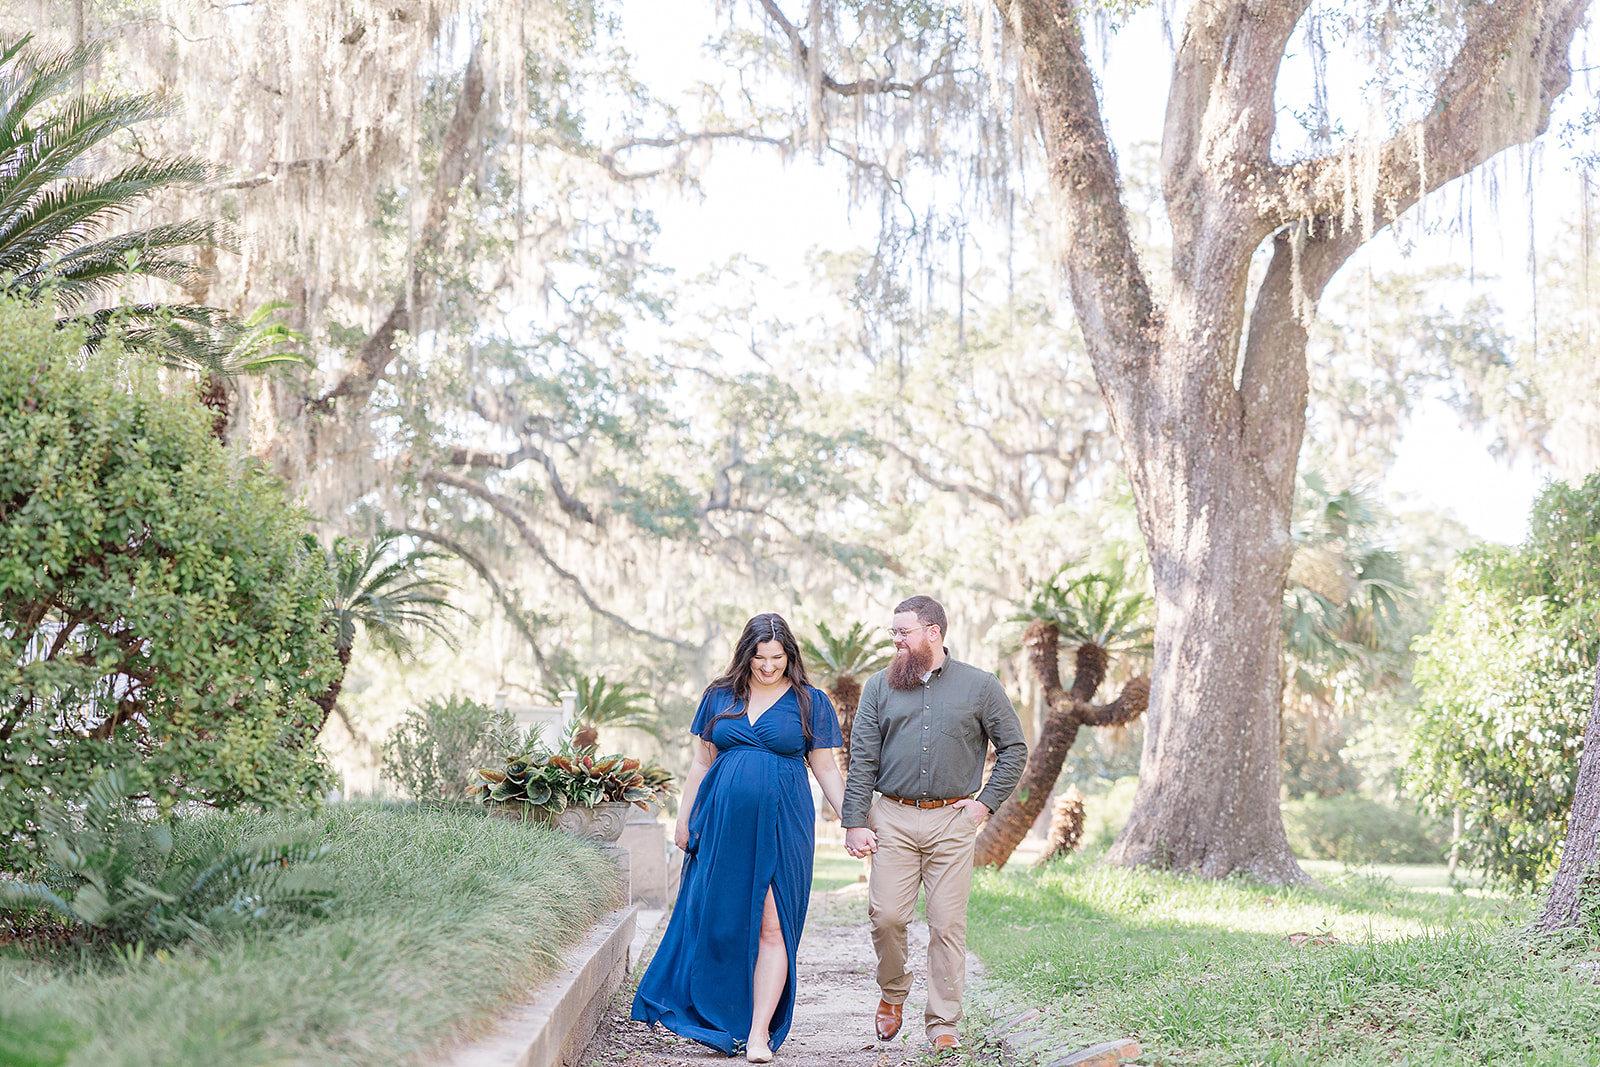 Expectant Mom and Dad walking along a gravel sidewalk